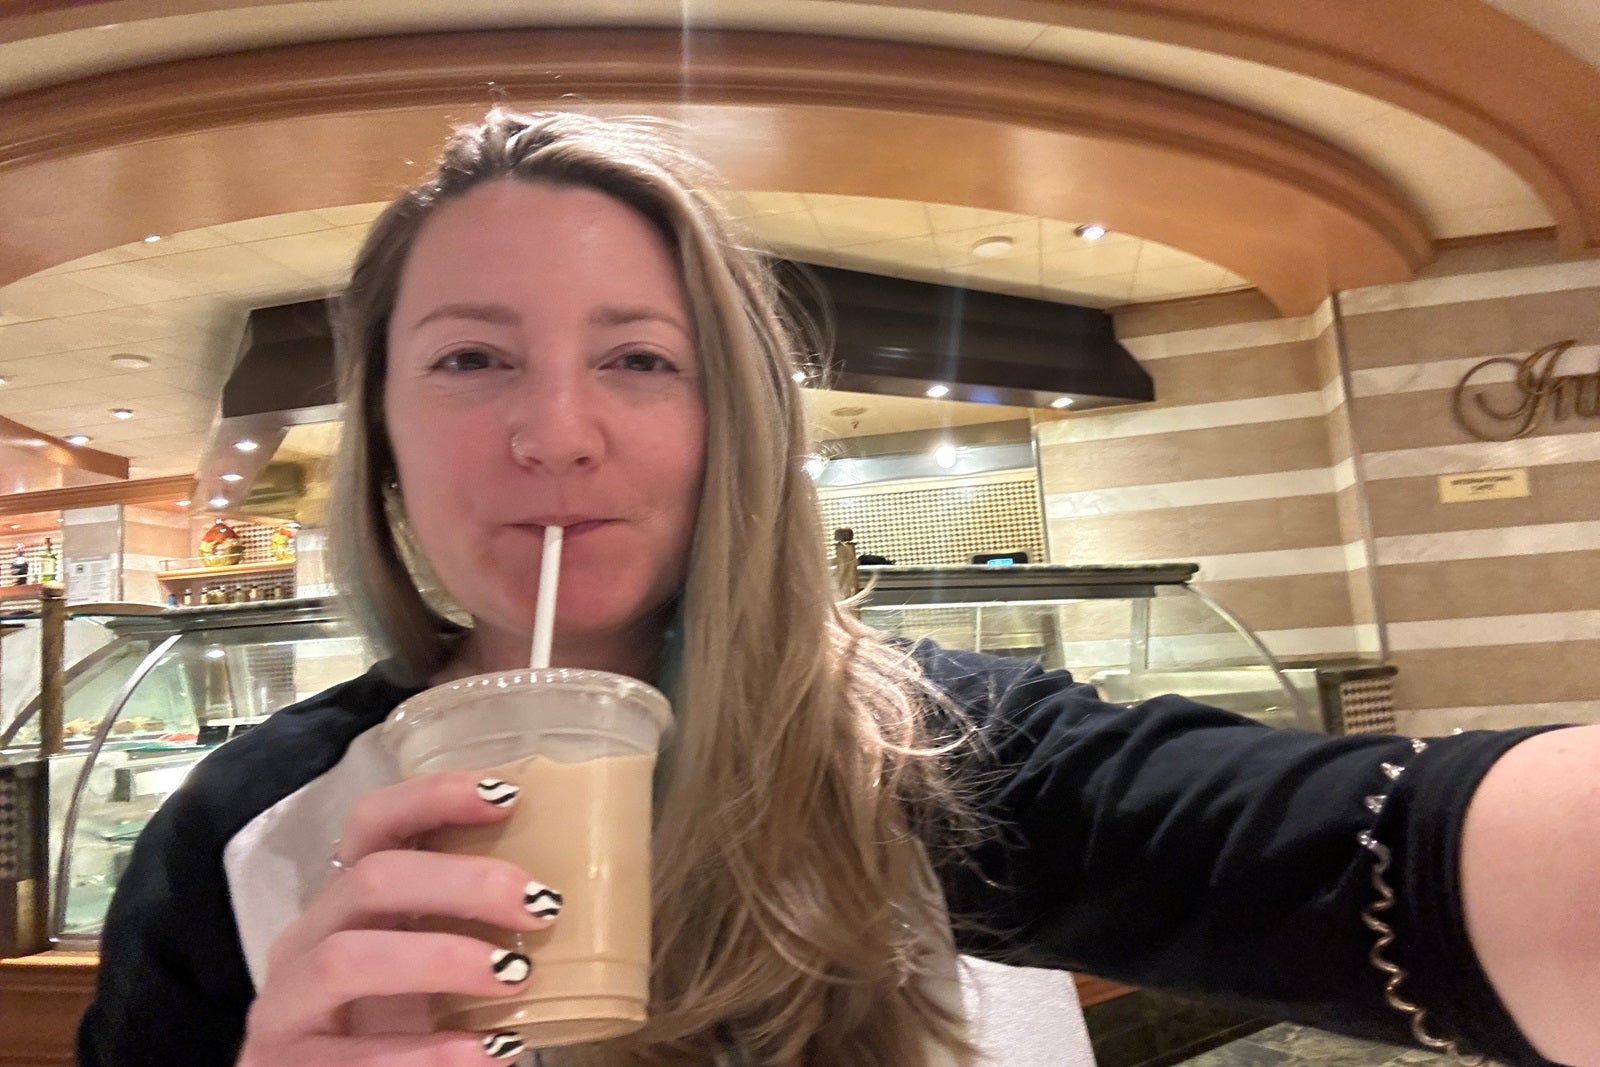 A woman holding an iced coffee